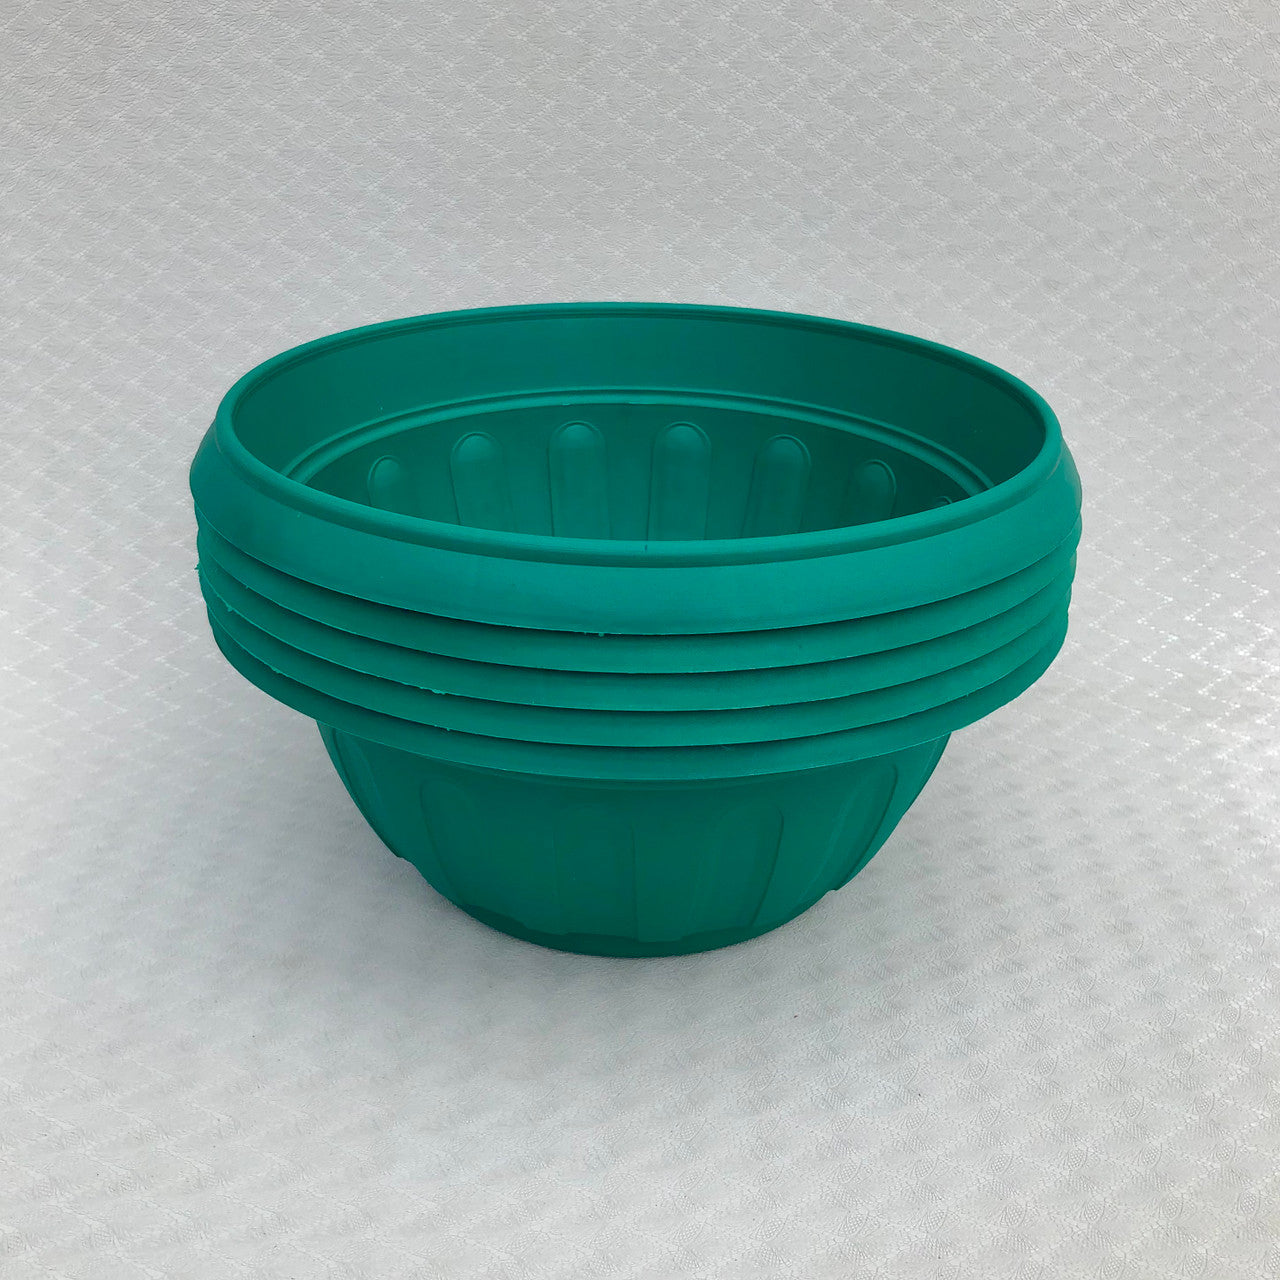 Our 10 inch plastic planters in a 5 pack